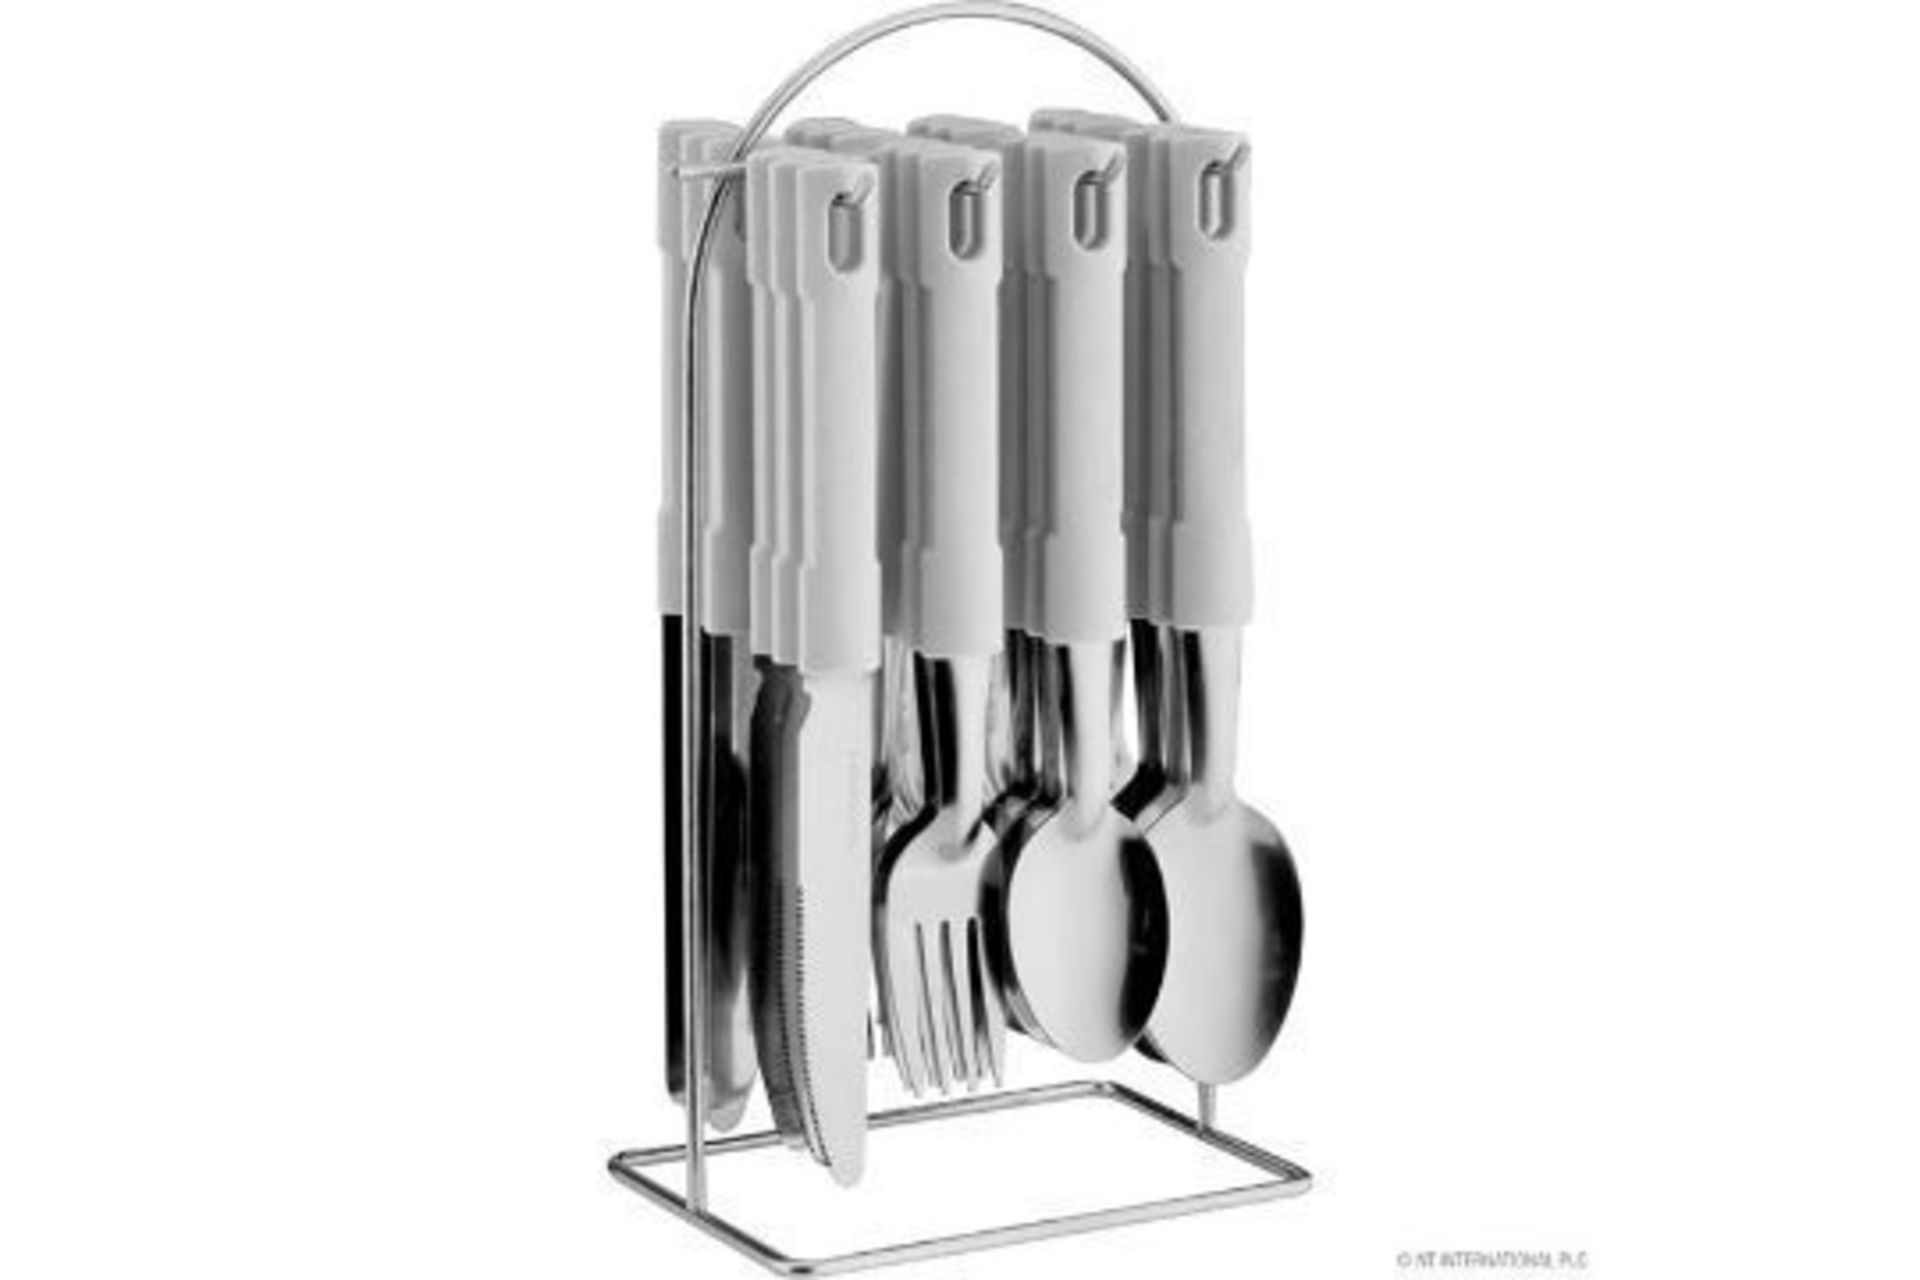 New White 24pc S/S Cutlery Set with Metal Stand